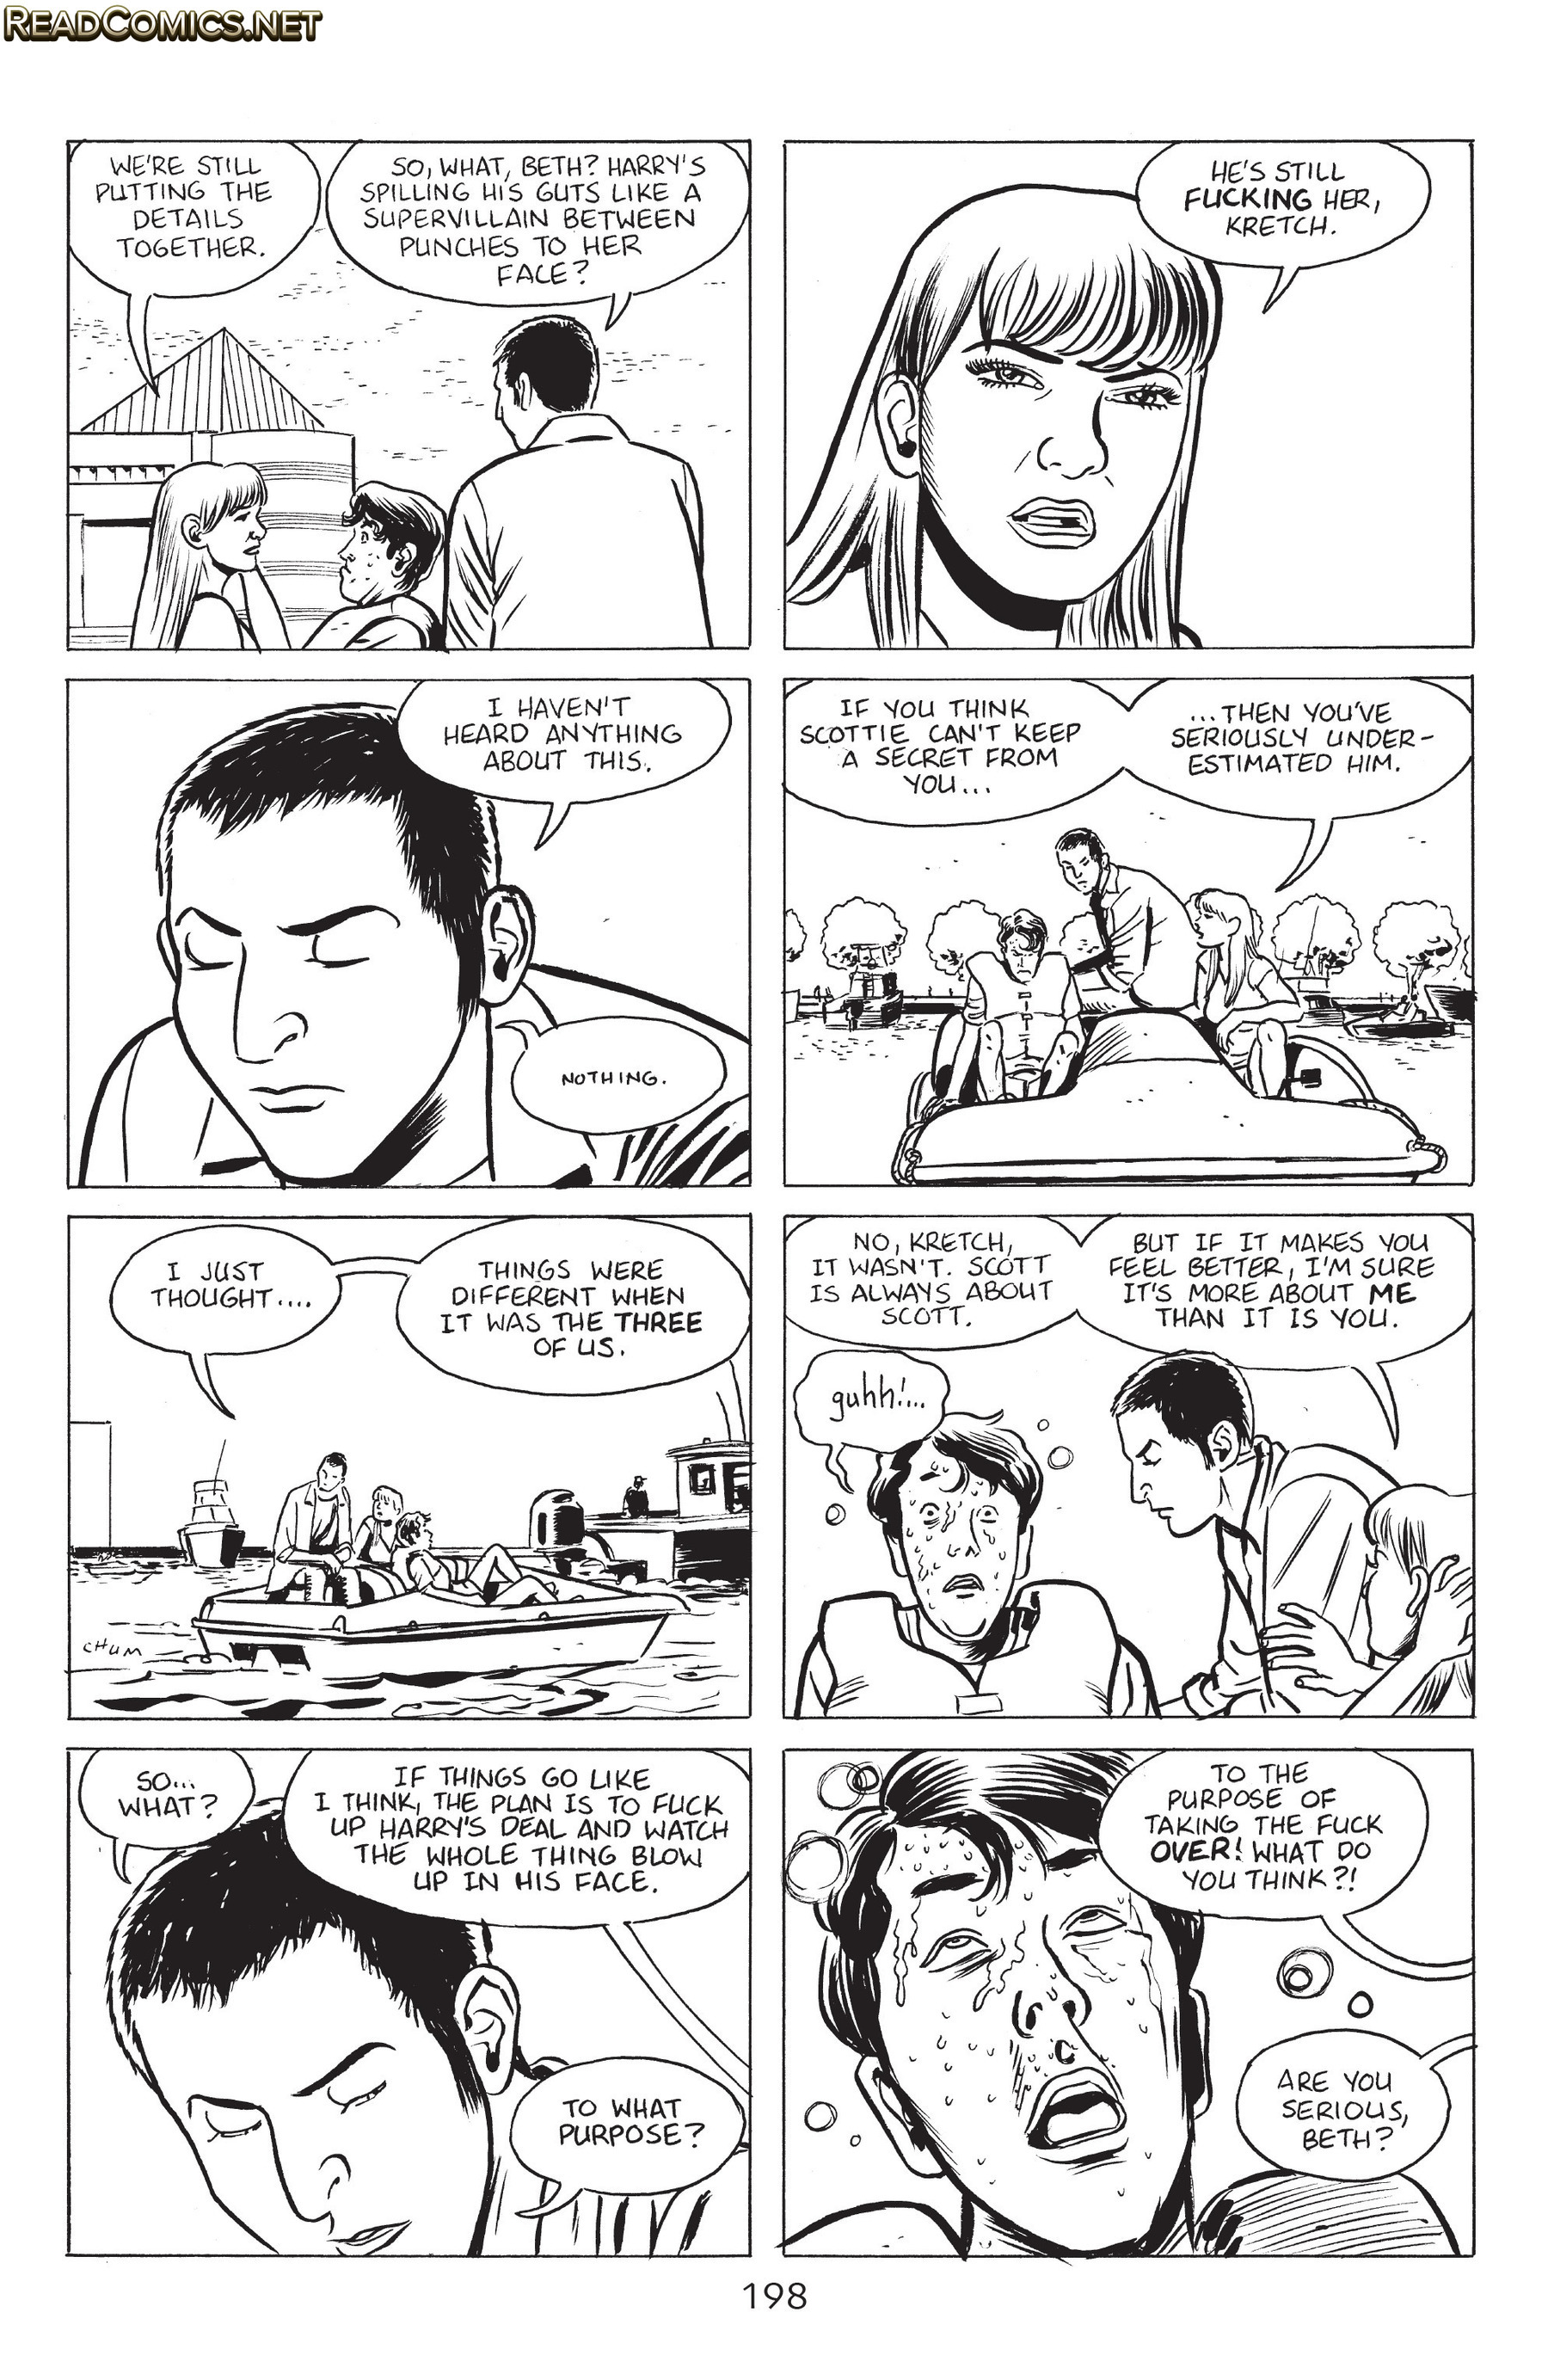 Stray Bullets: Sunshine & Roses (2015-): Chapter 8 - Page 4